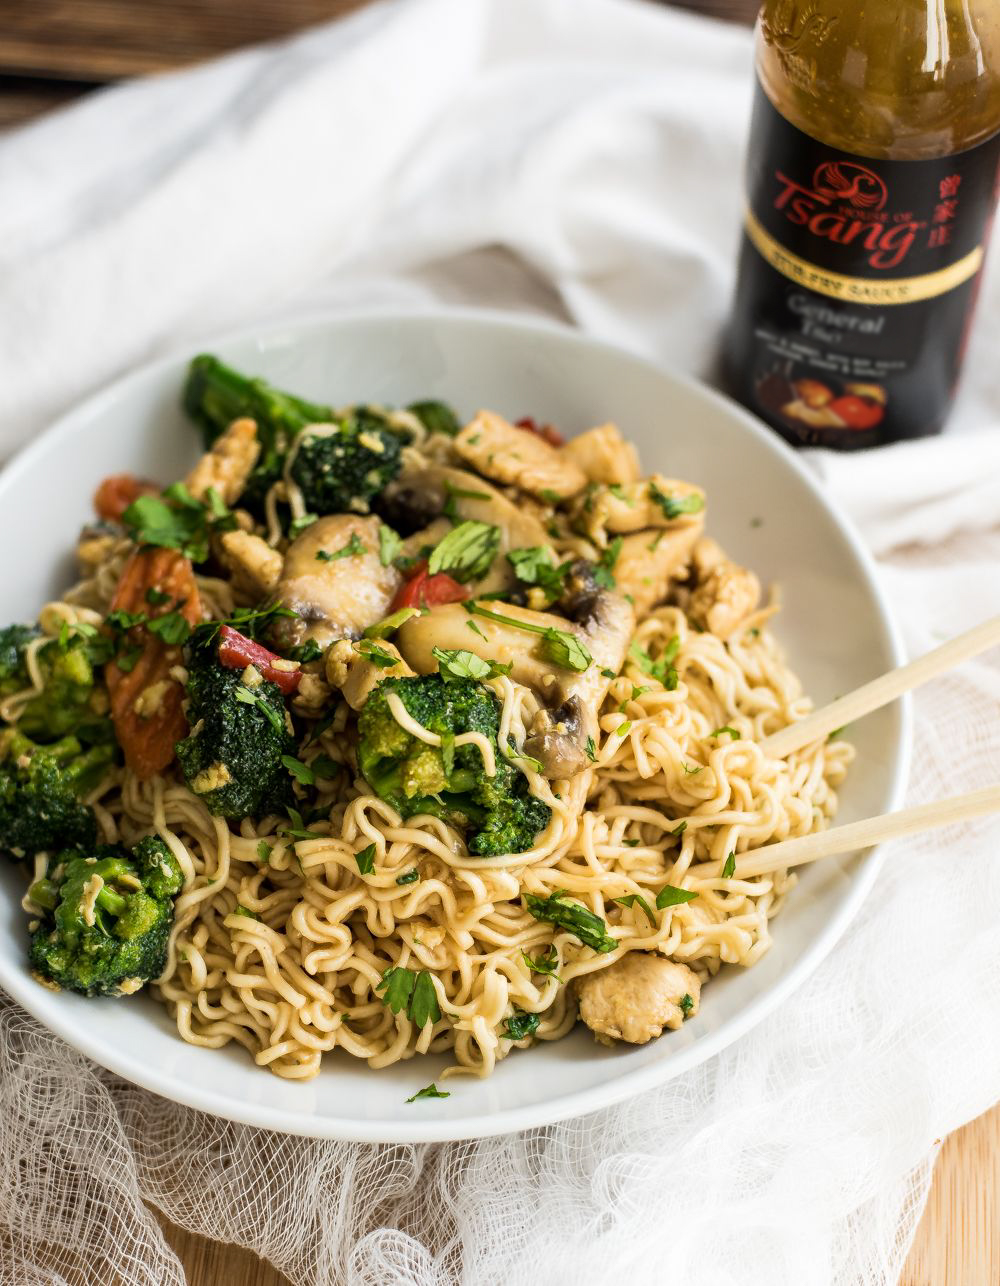 30-Minute Chicken Stir Fry Ramen is the perfect family-friendly weeknight meal. It is on the table in 30 minutes and is exploding with flavor thanks to House of Tsang's General Tso Stir-Fry Sauce!